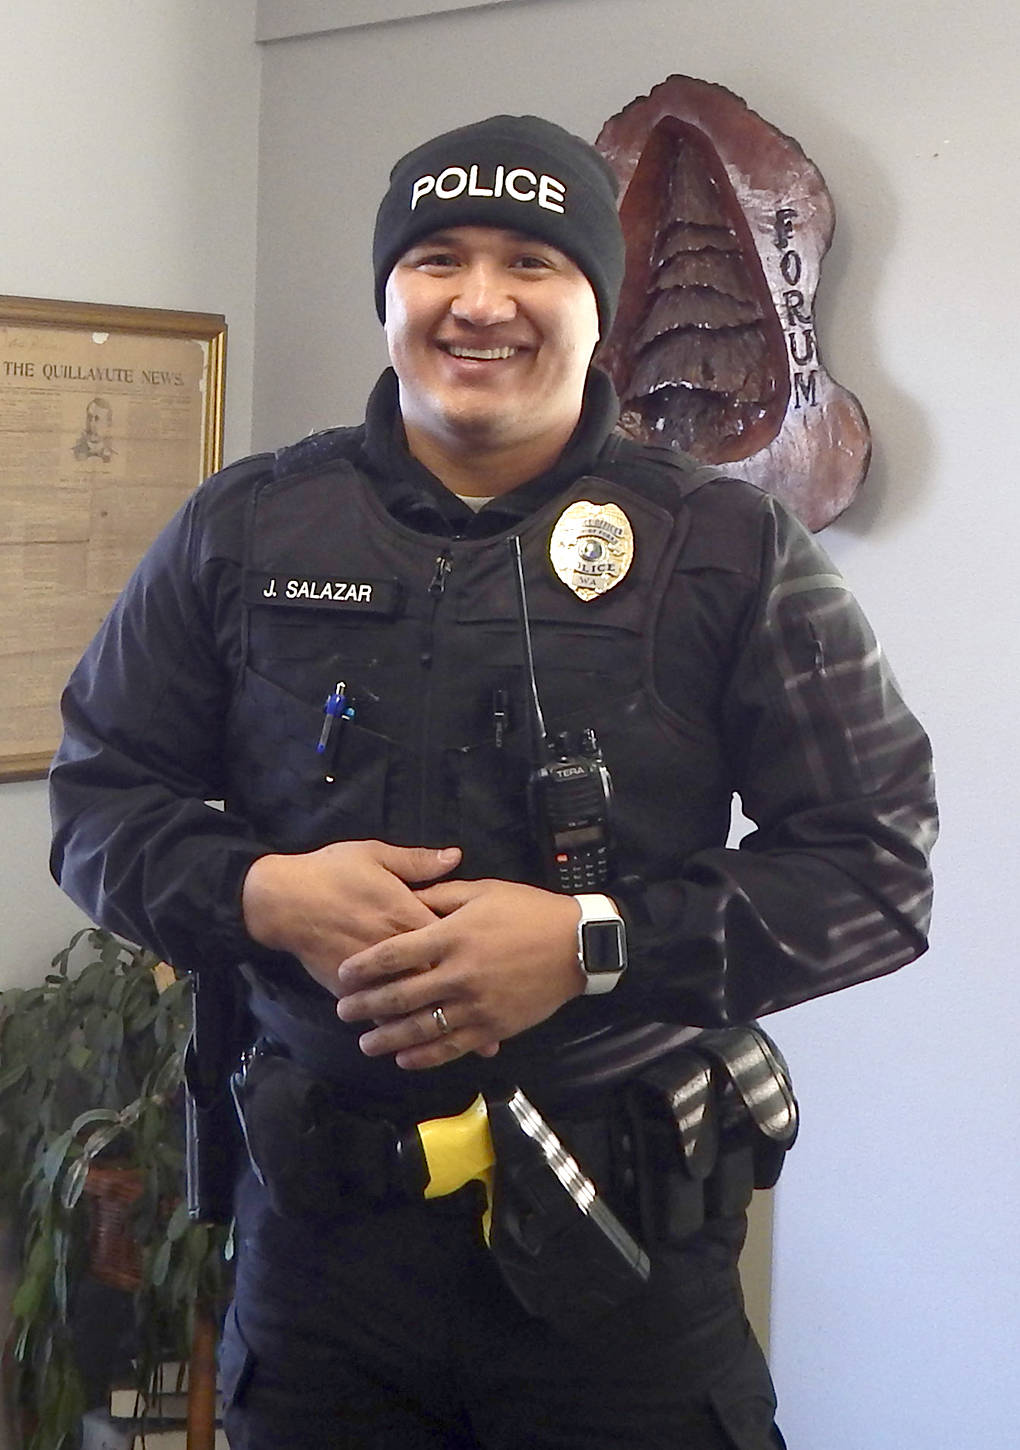 James Salazar has been welcomed as the newest member of the Forks Police Department. Salazar graduated from FHS in 2015 and spent some time in the military and is now on his hometown police force! Photo Christi Baron